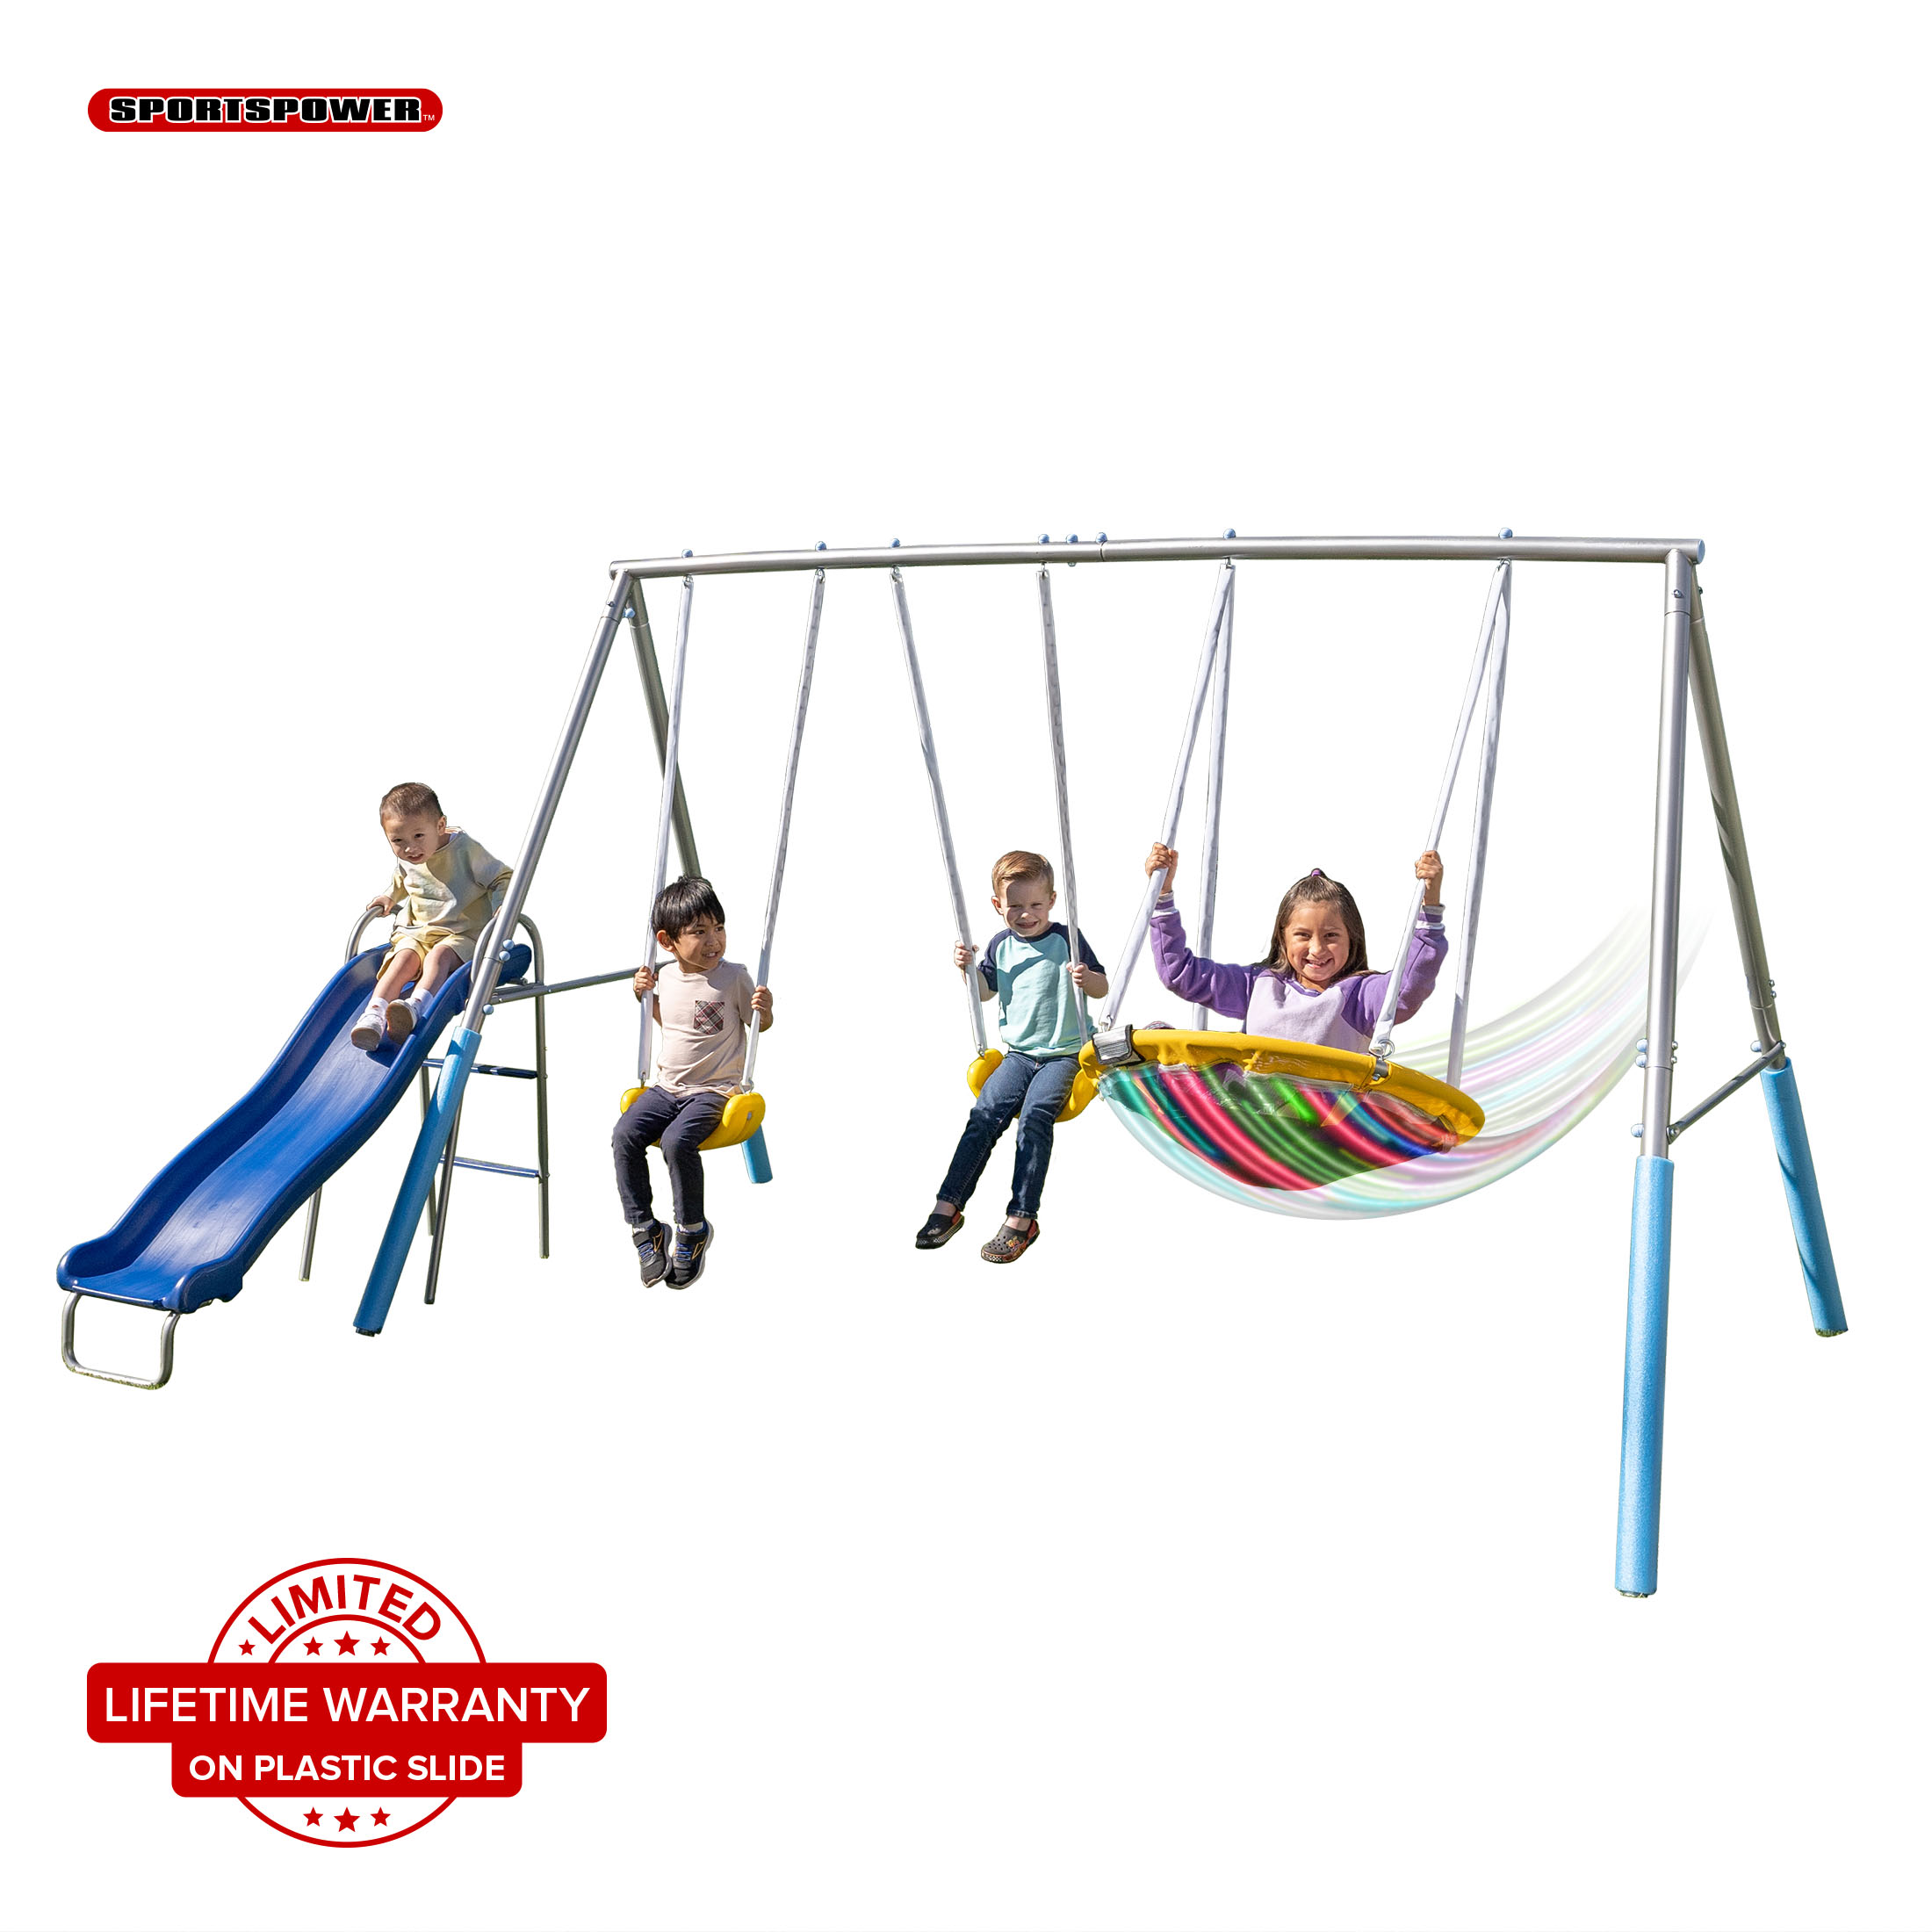 Sportspower Comet Metal Swing Set with LED Light up Saucer Swing, 2 Swings, and Lifetime Warranty on Blow Molded Slide - image 1 of 15